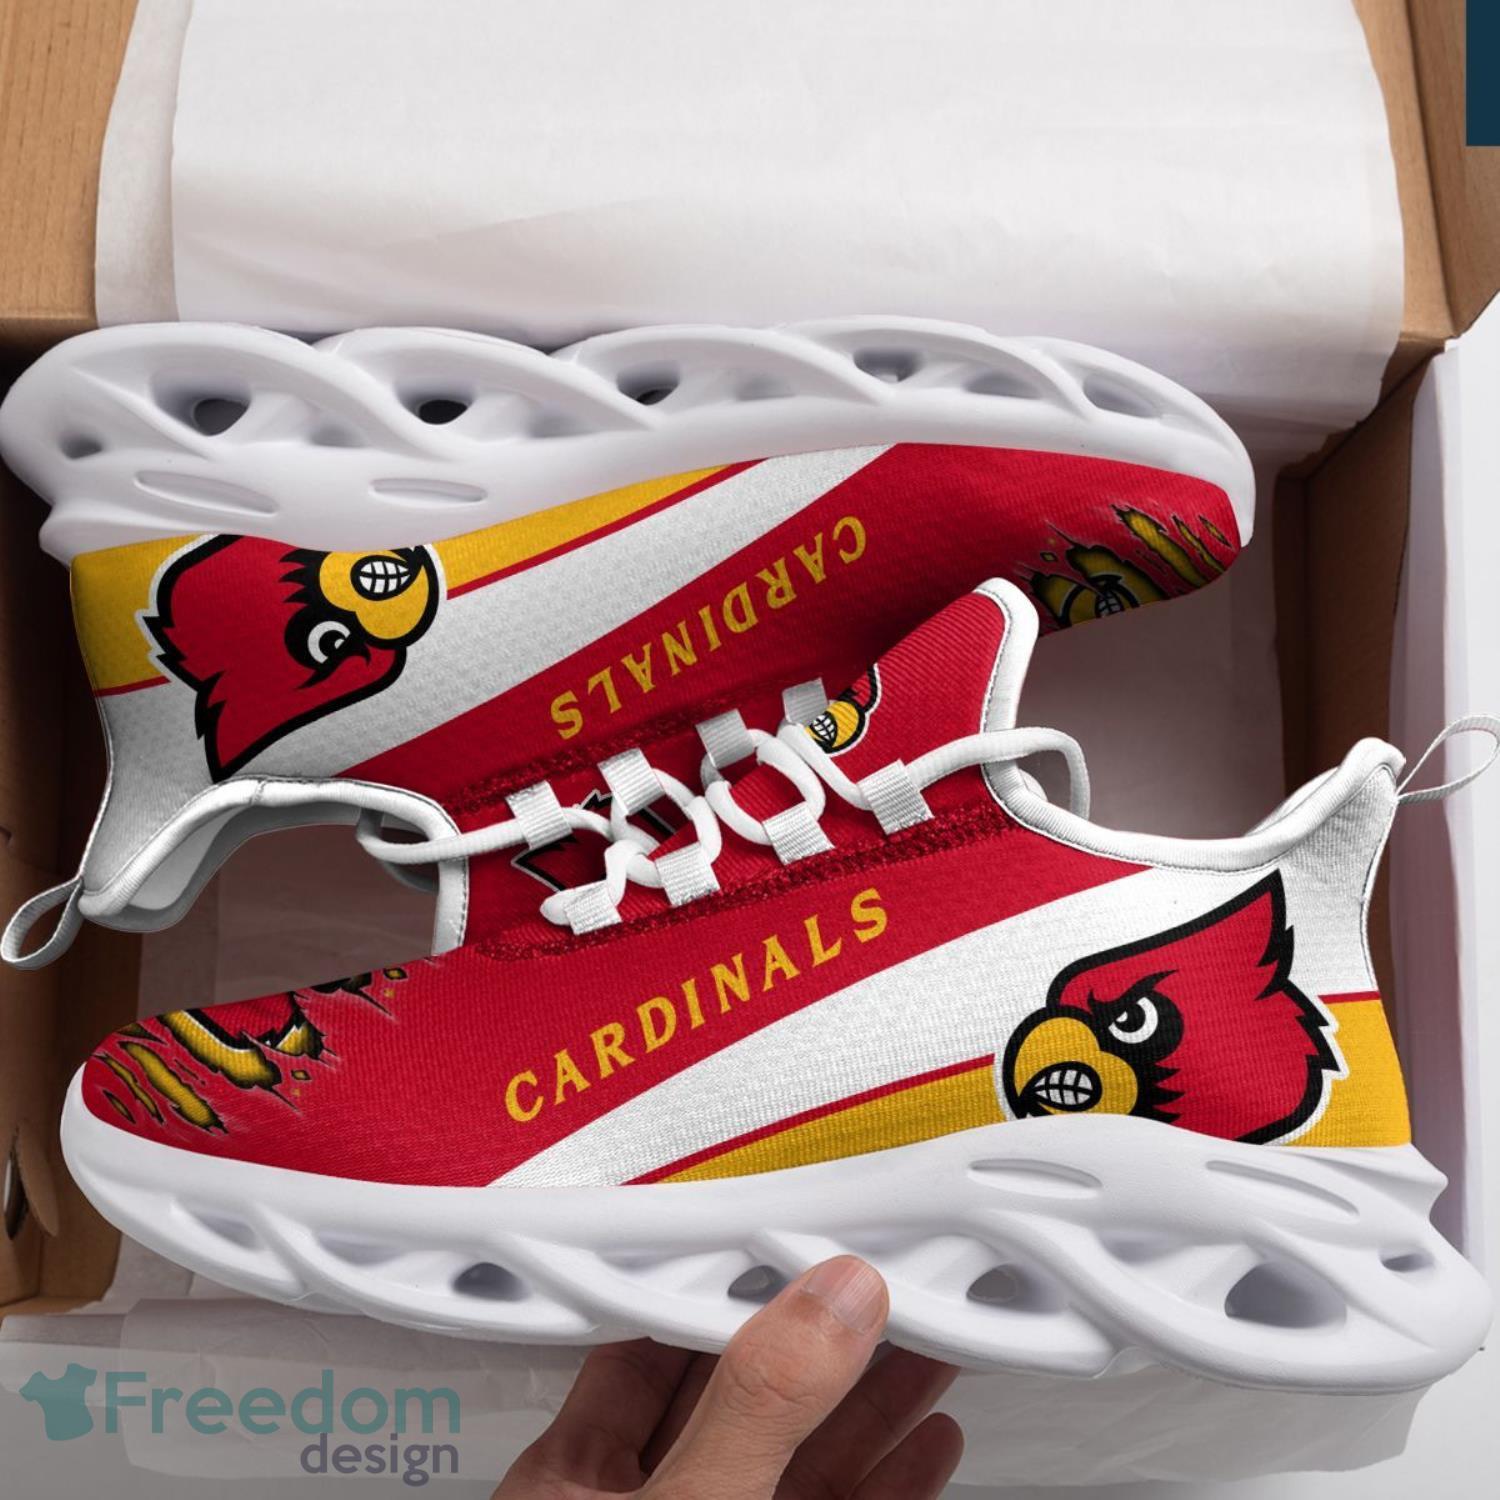 Louisville Cardinals NCAA Shoes for sale